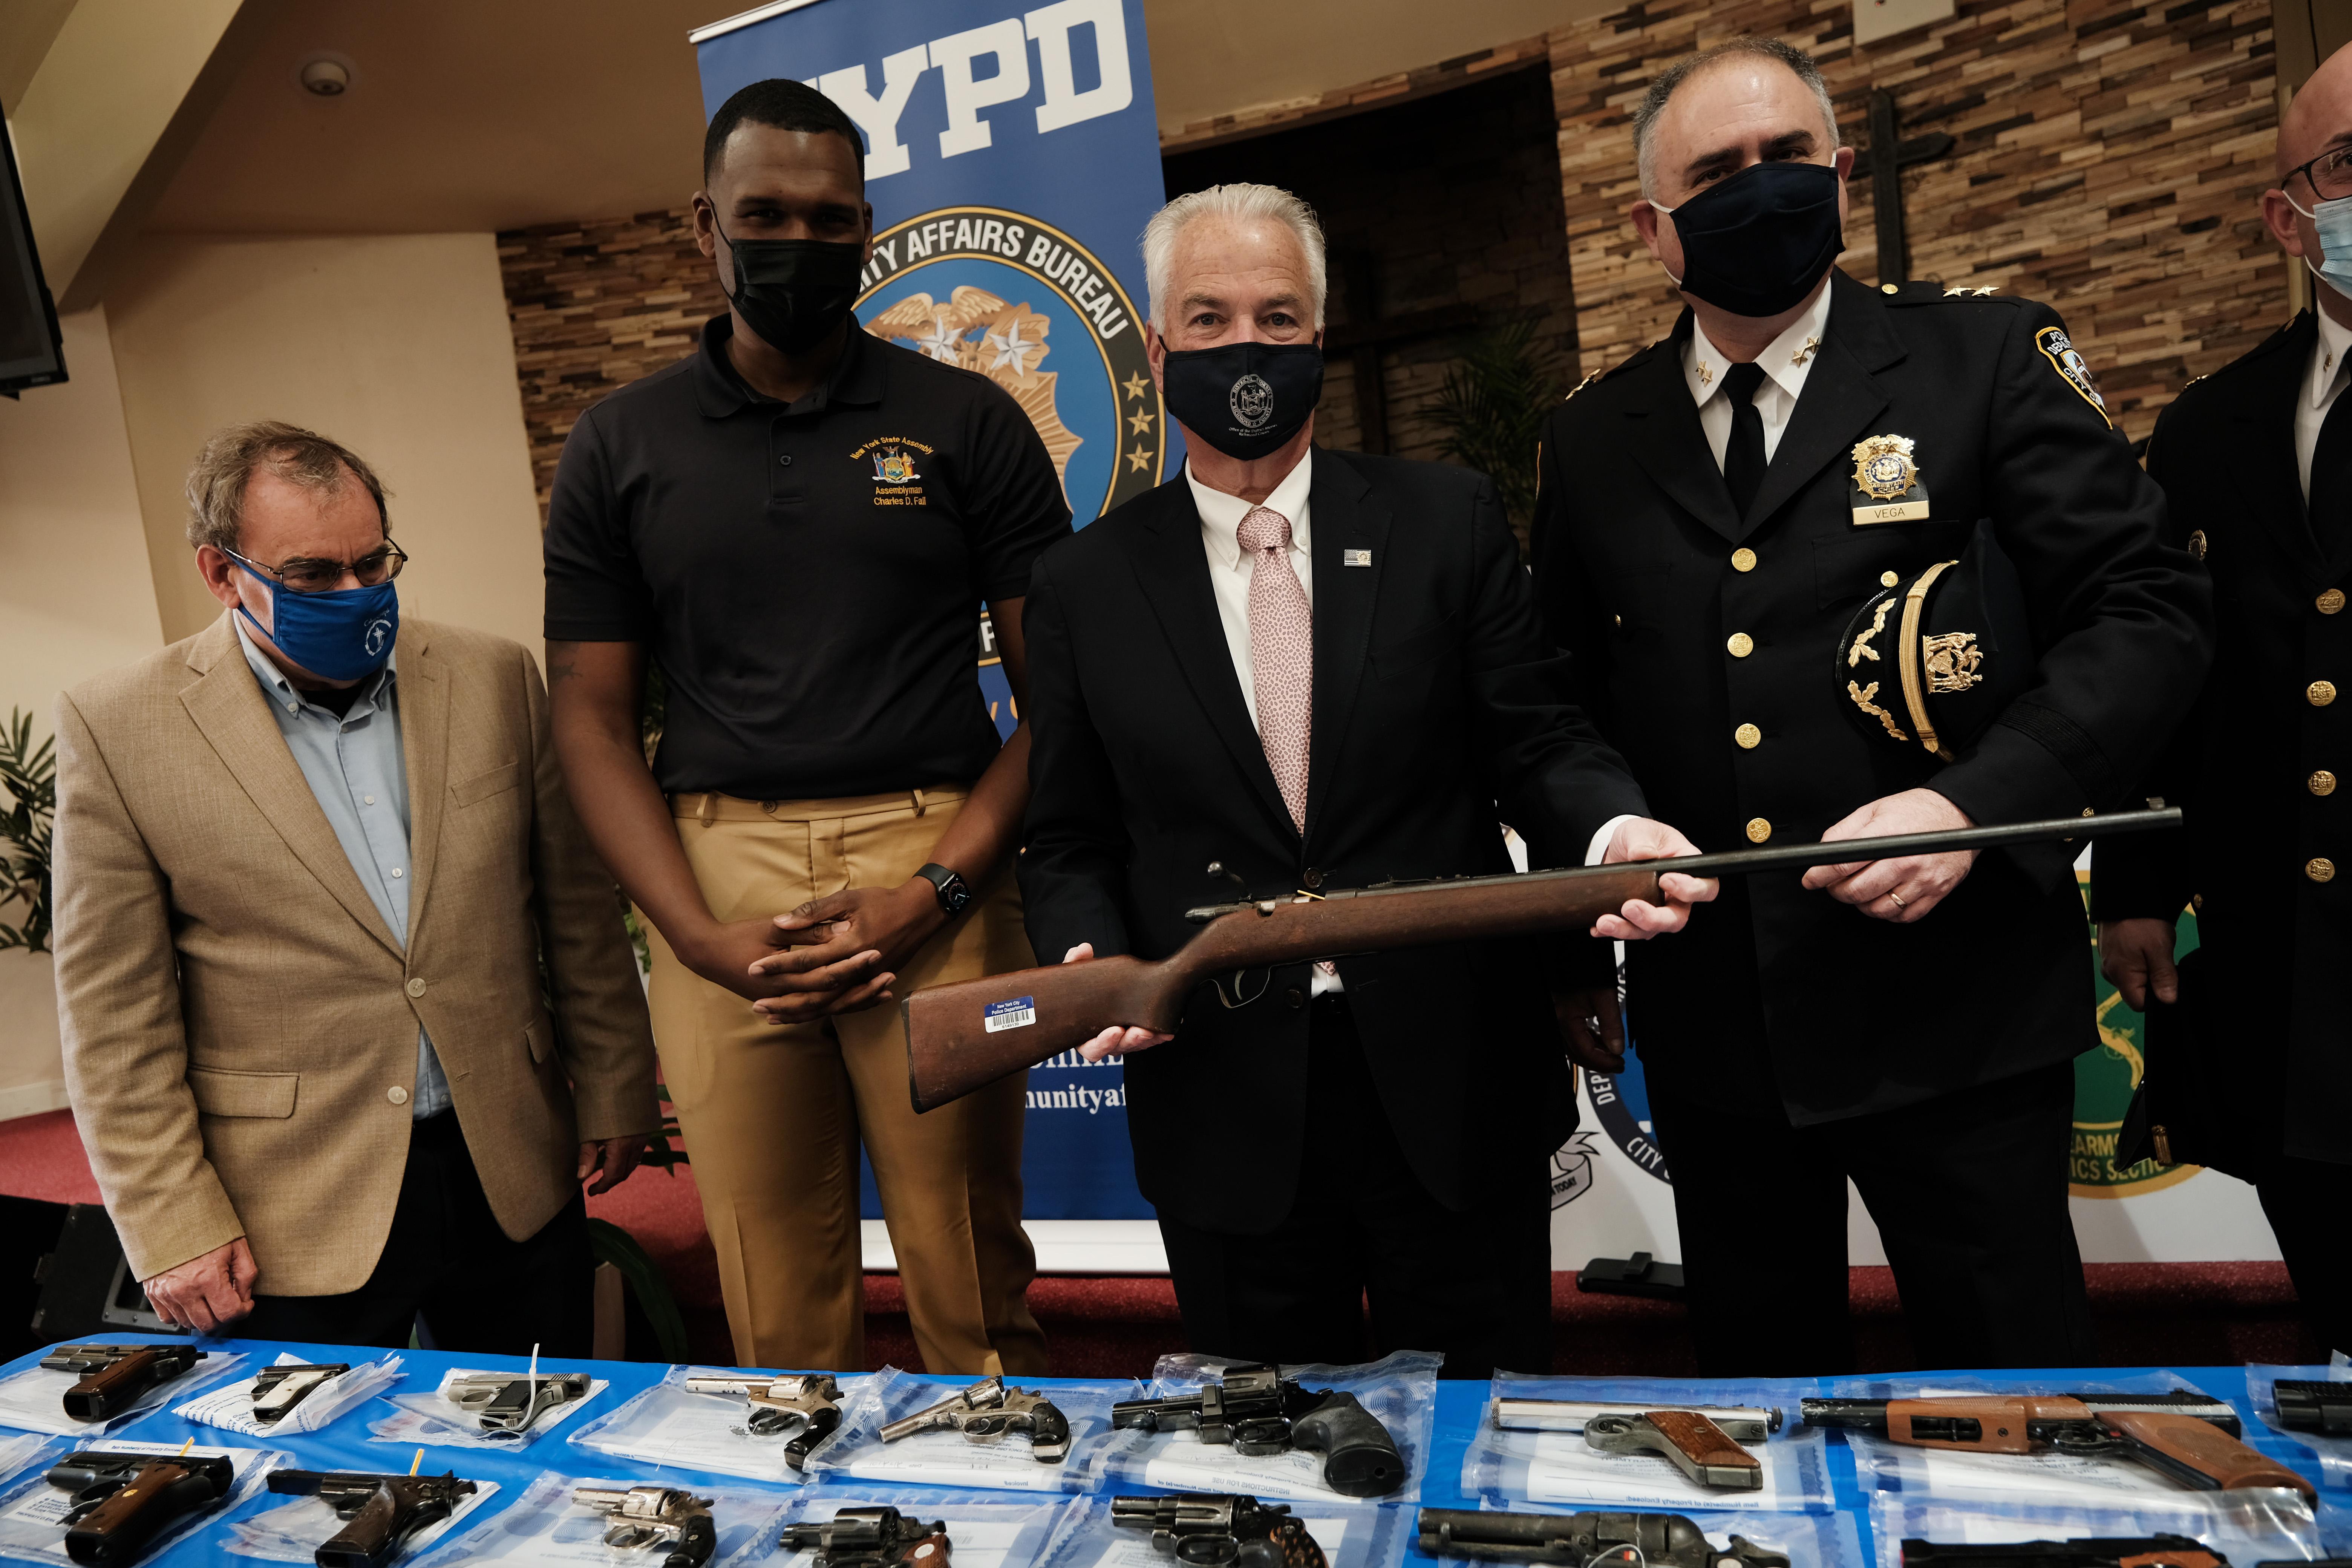 Law enforcement officials hold a rifle and stand over a table of handguns.